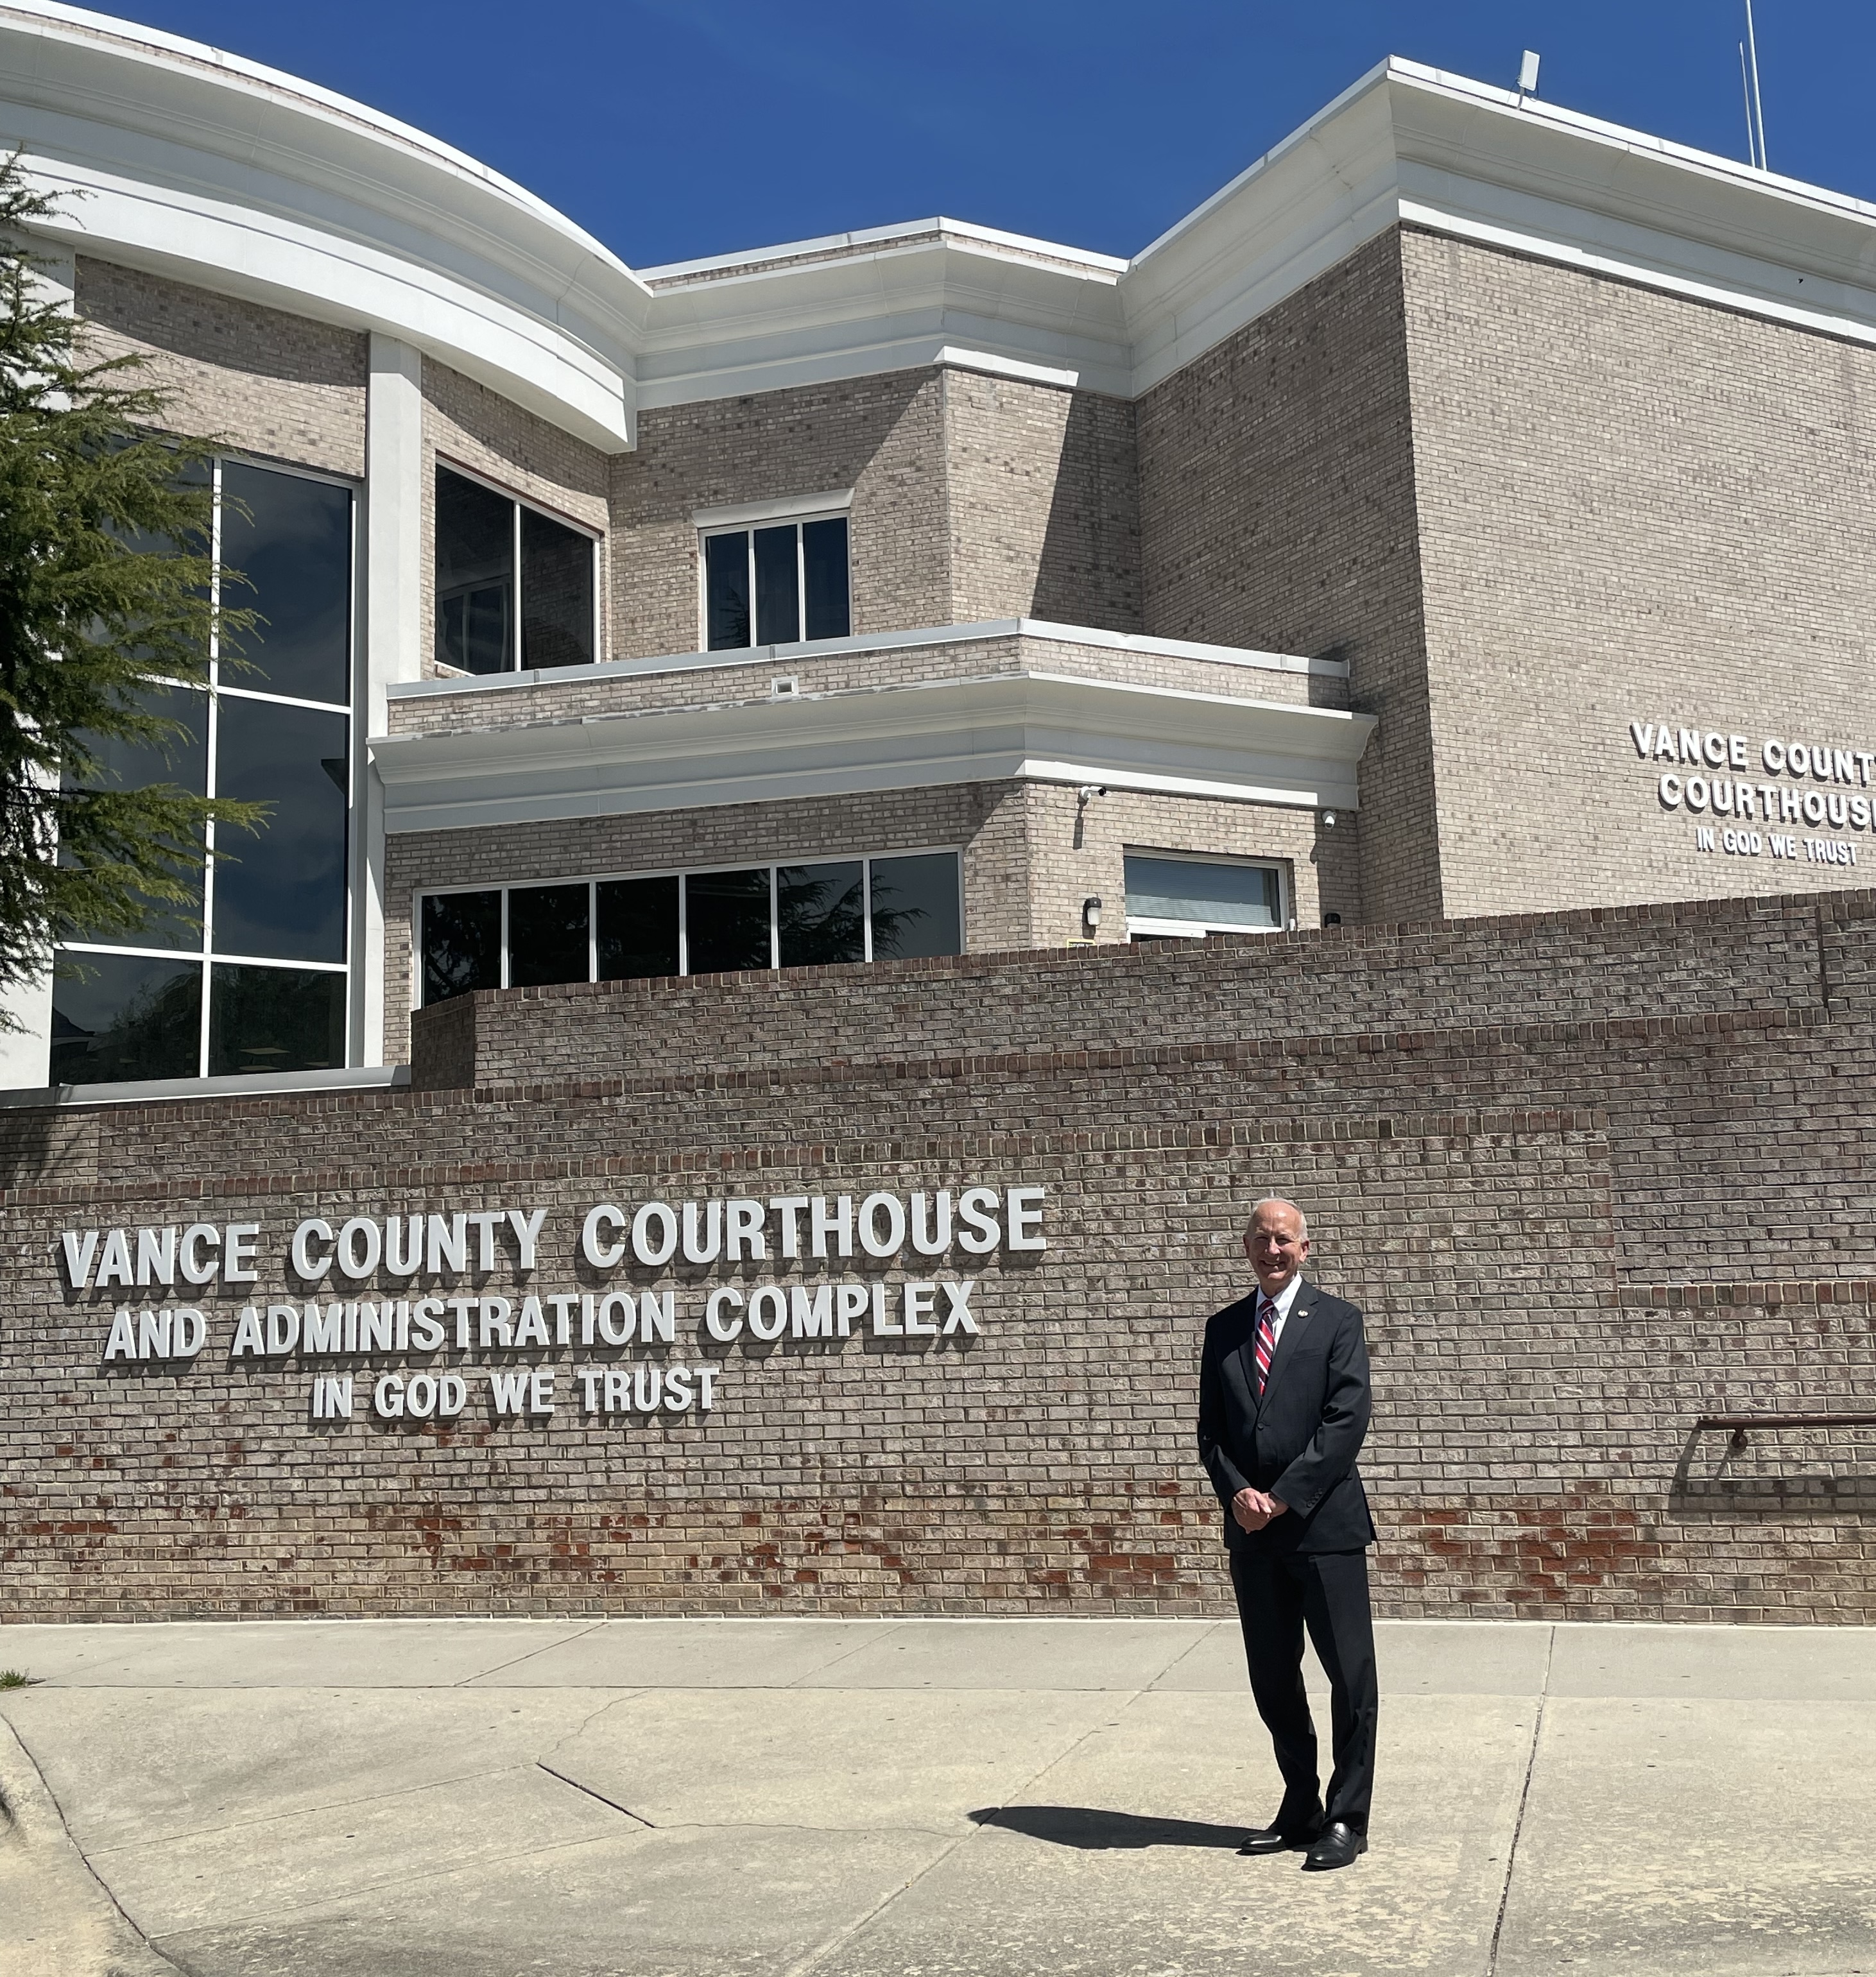 Vance County Courthouse